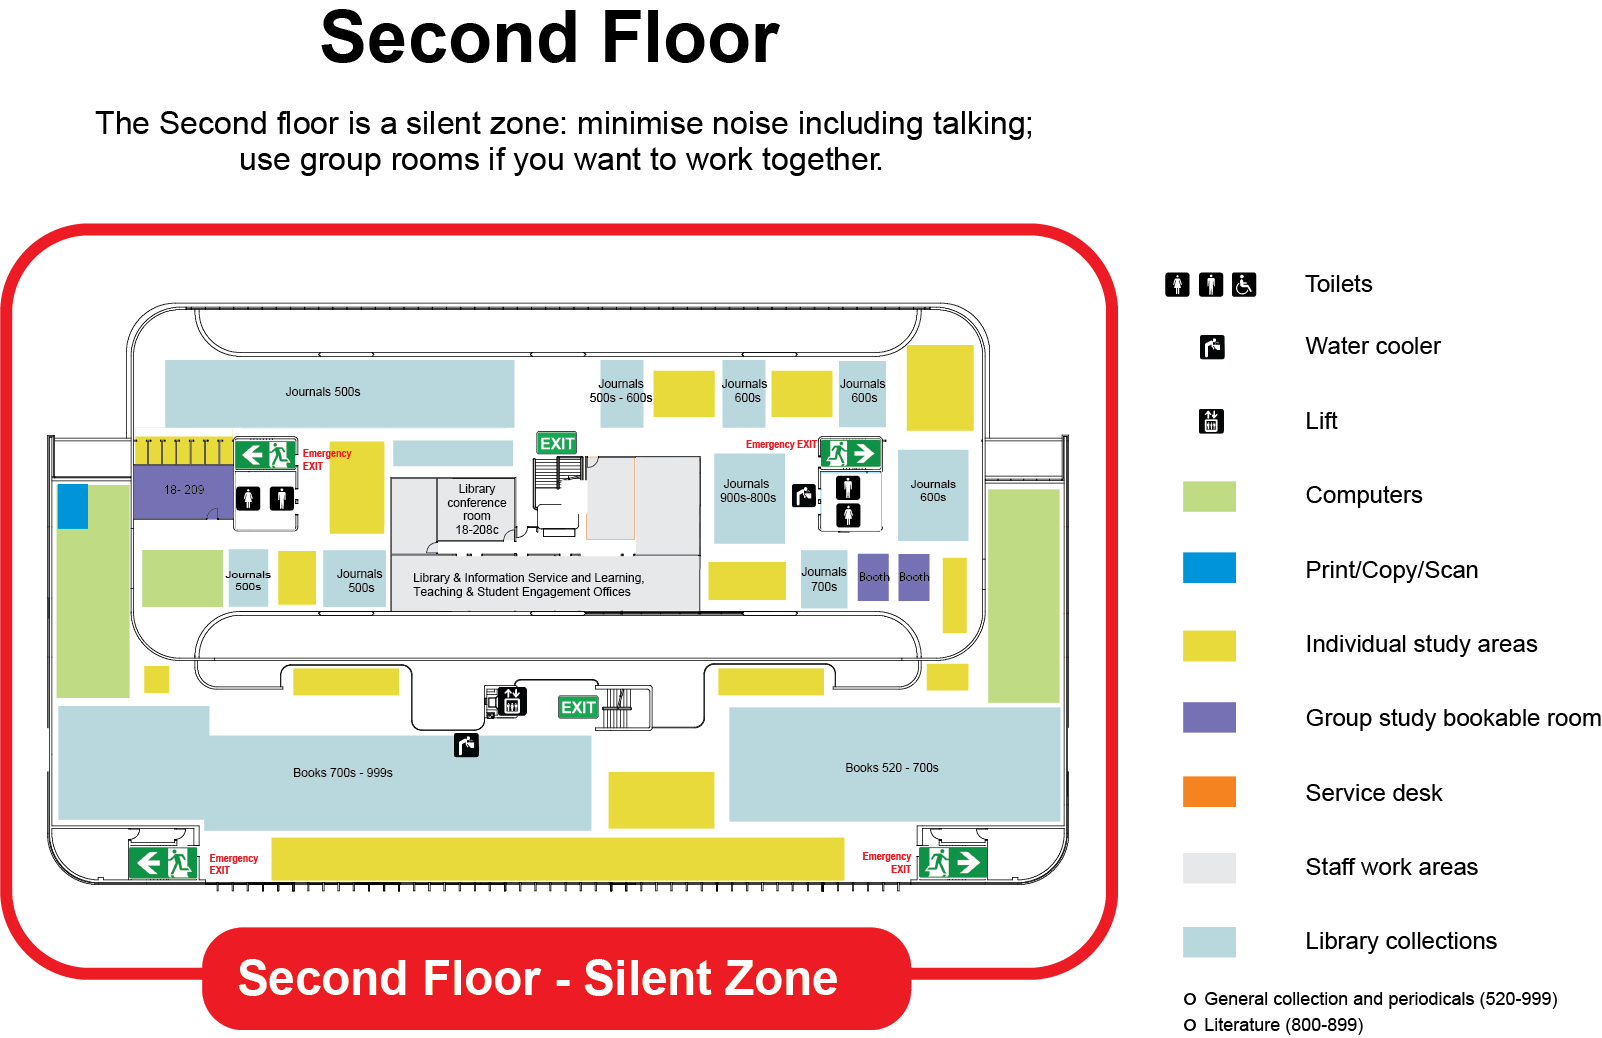 Townsville library second floor plan